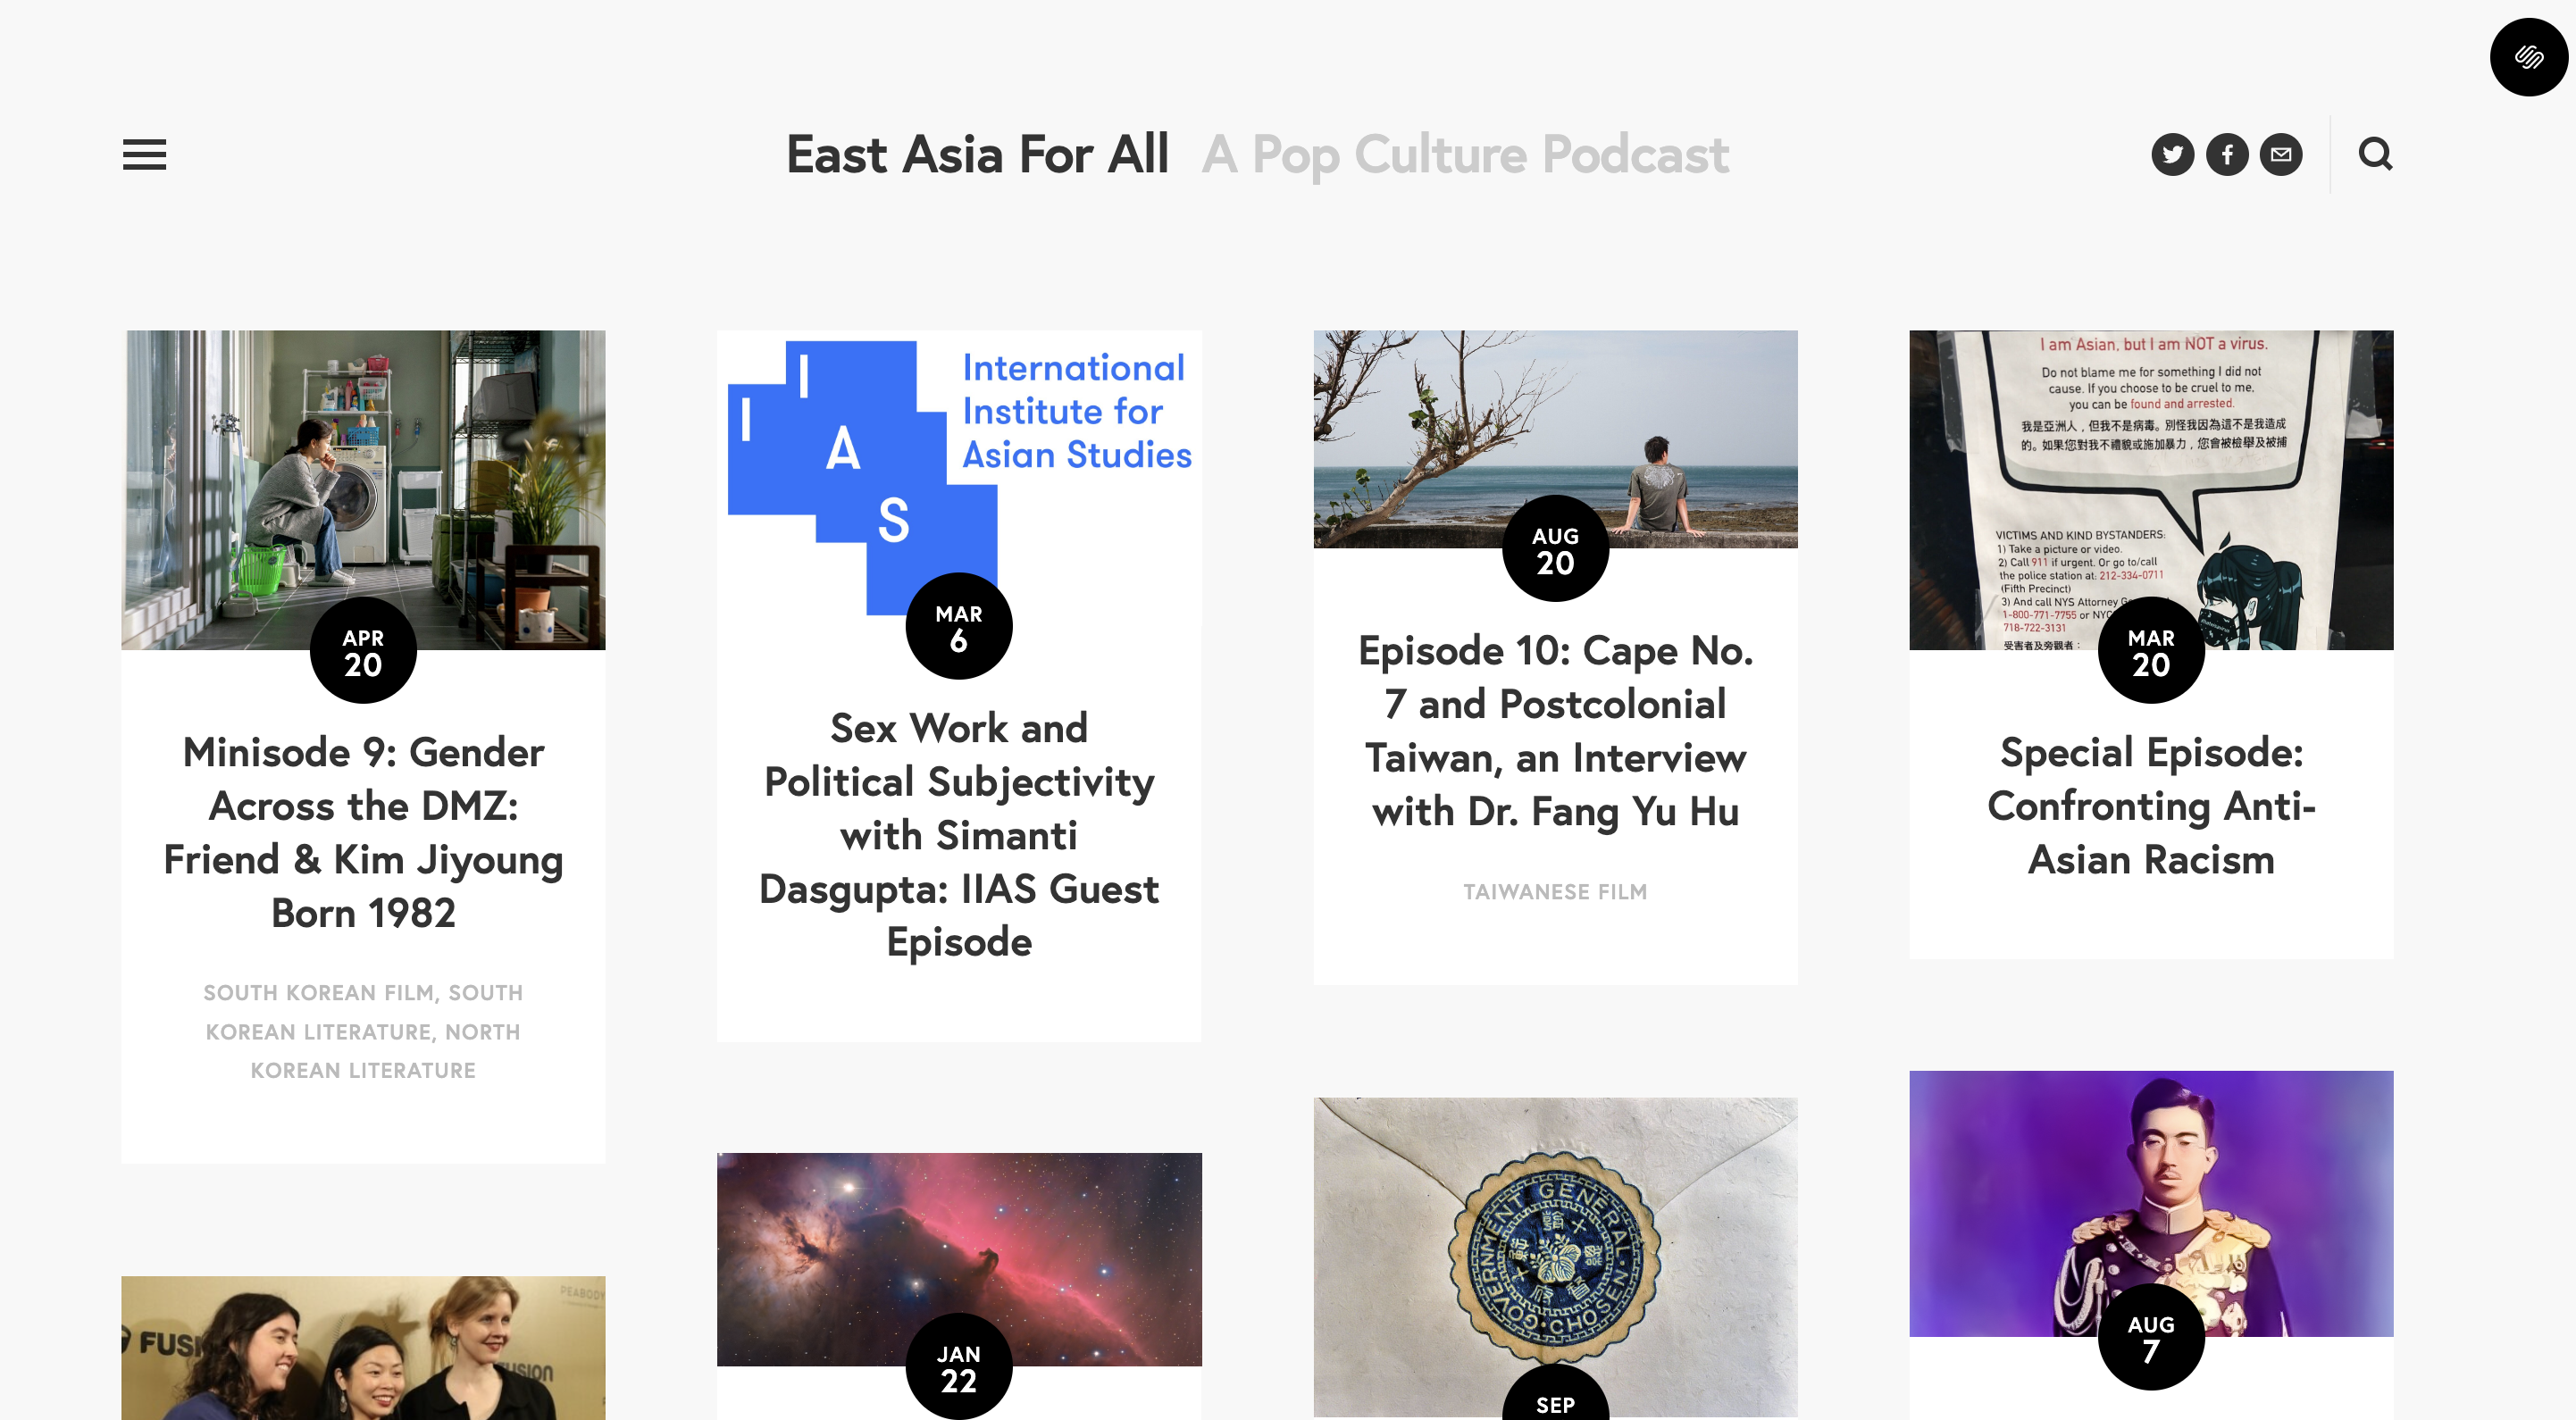 This is the image of the front page of the podcast website